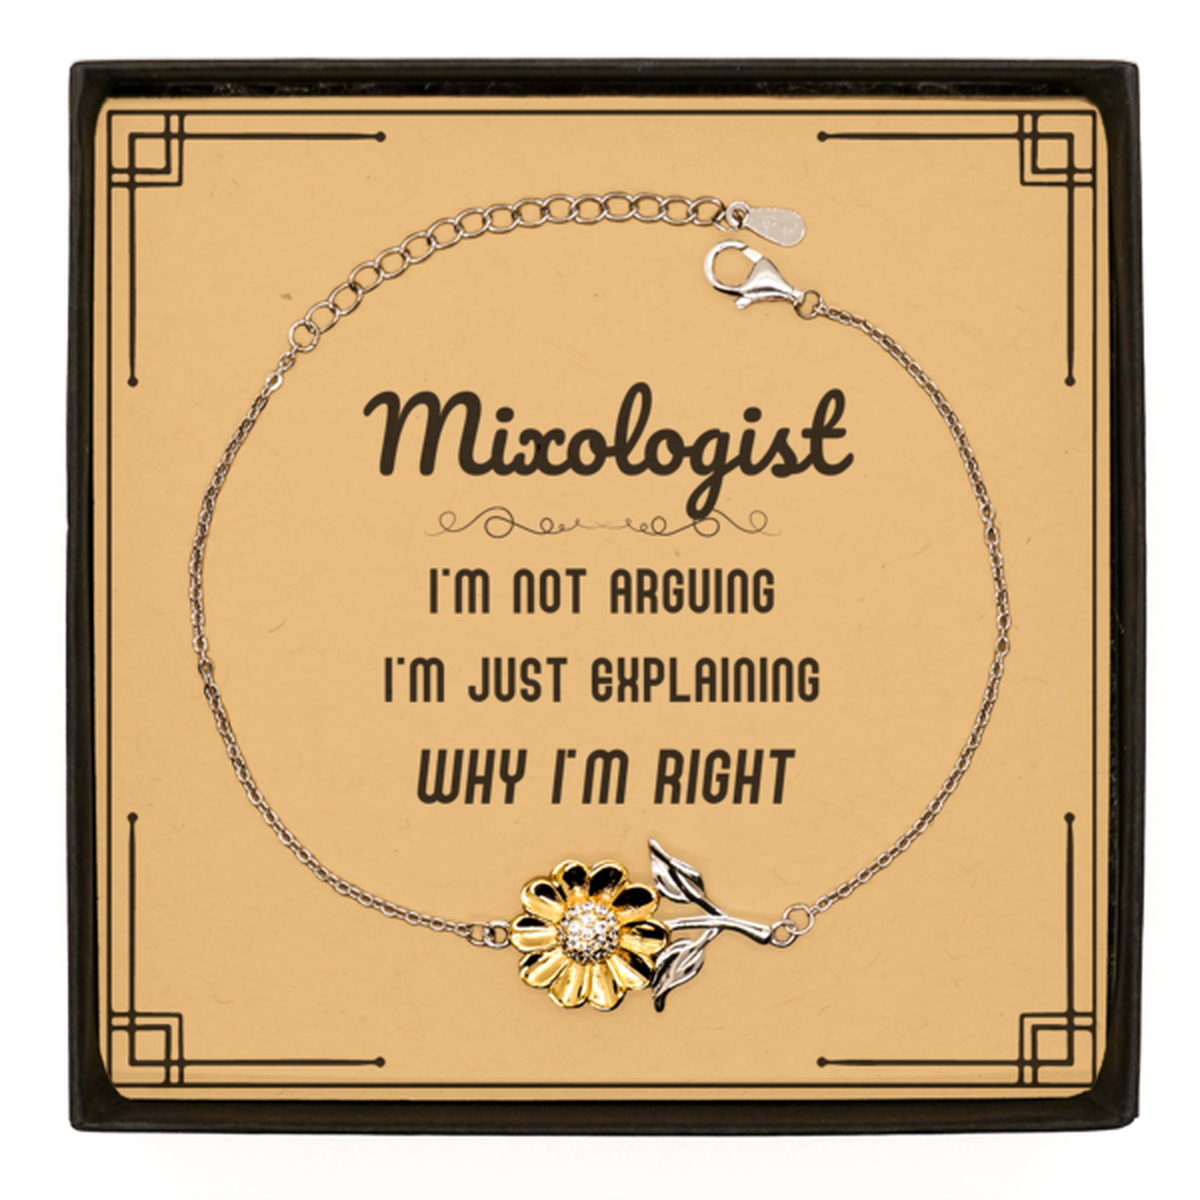 Mixologist I'm not Arguing. I'm Just Explaining Why I'm RIGHT Sunflower Bracelet, Funny Saying Quote Mixologist Gifts For Mixologist Message Card Graduation Birthday Christmas Gifts for Men Women Coworker